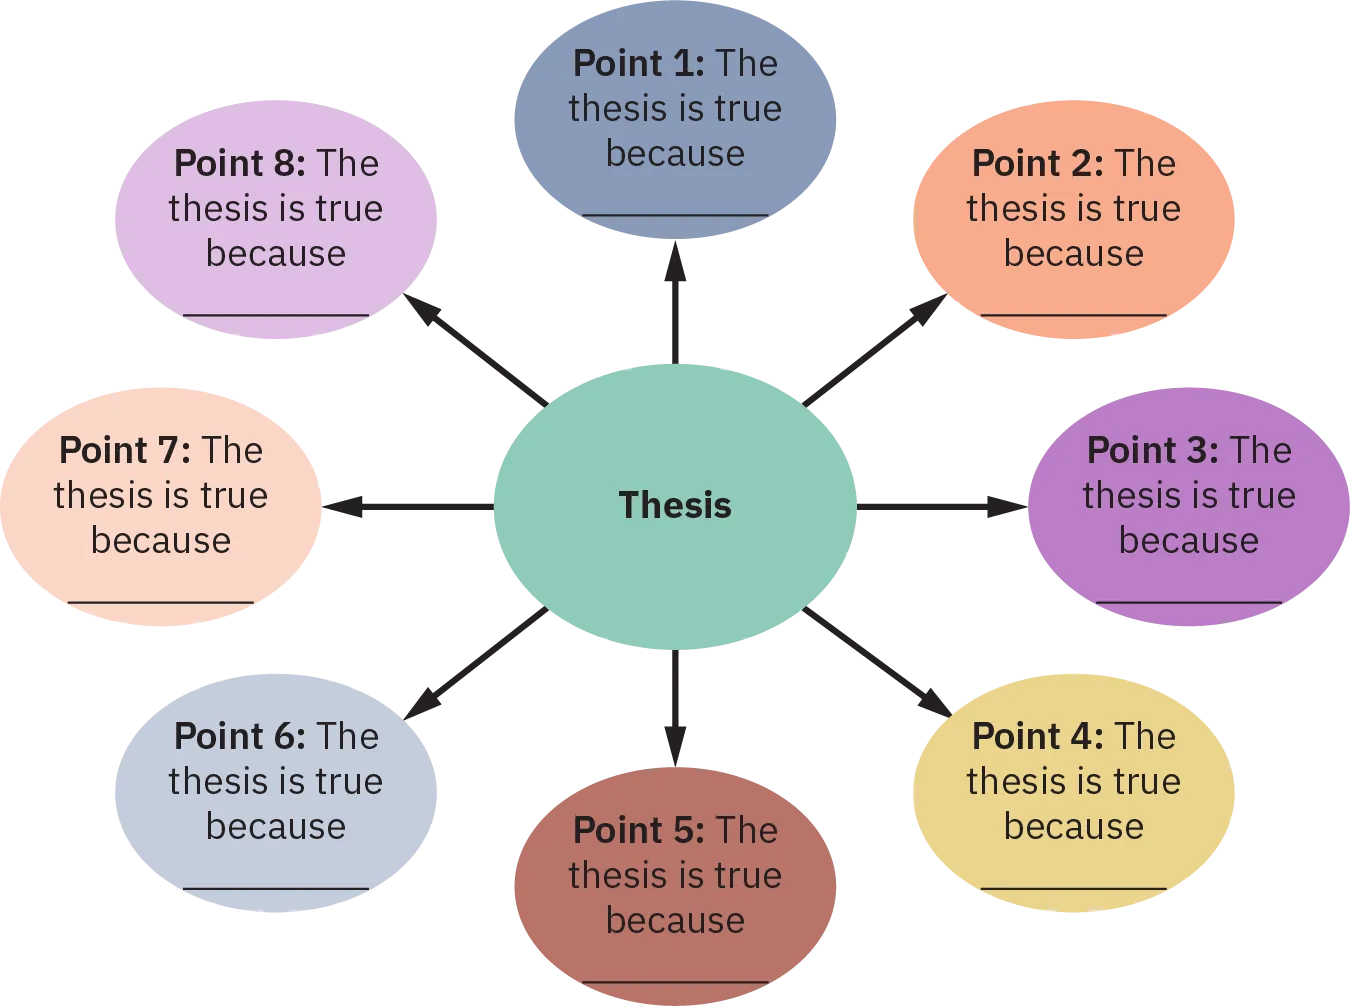 A web diagram with “Thesis” in the center circles contains eight radiating circles that each read, “The thesis is true because ________.